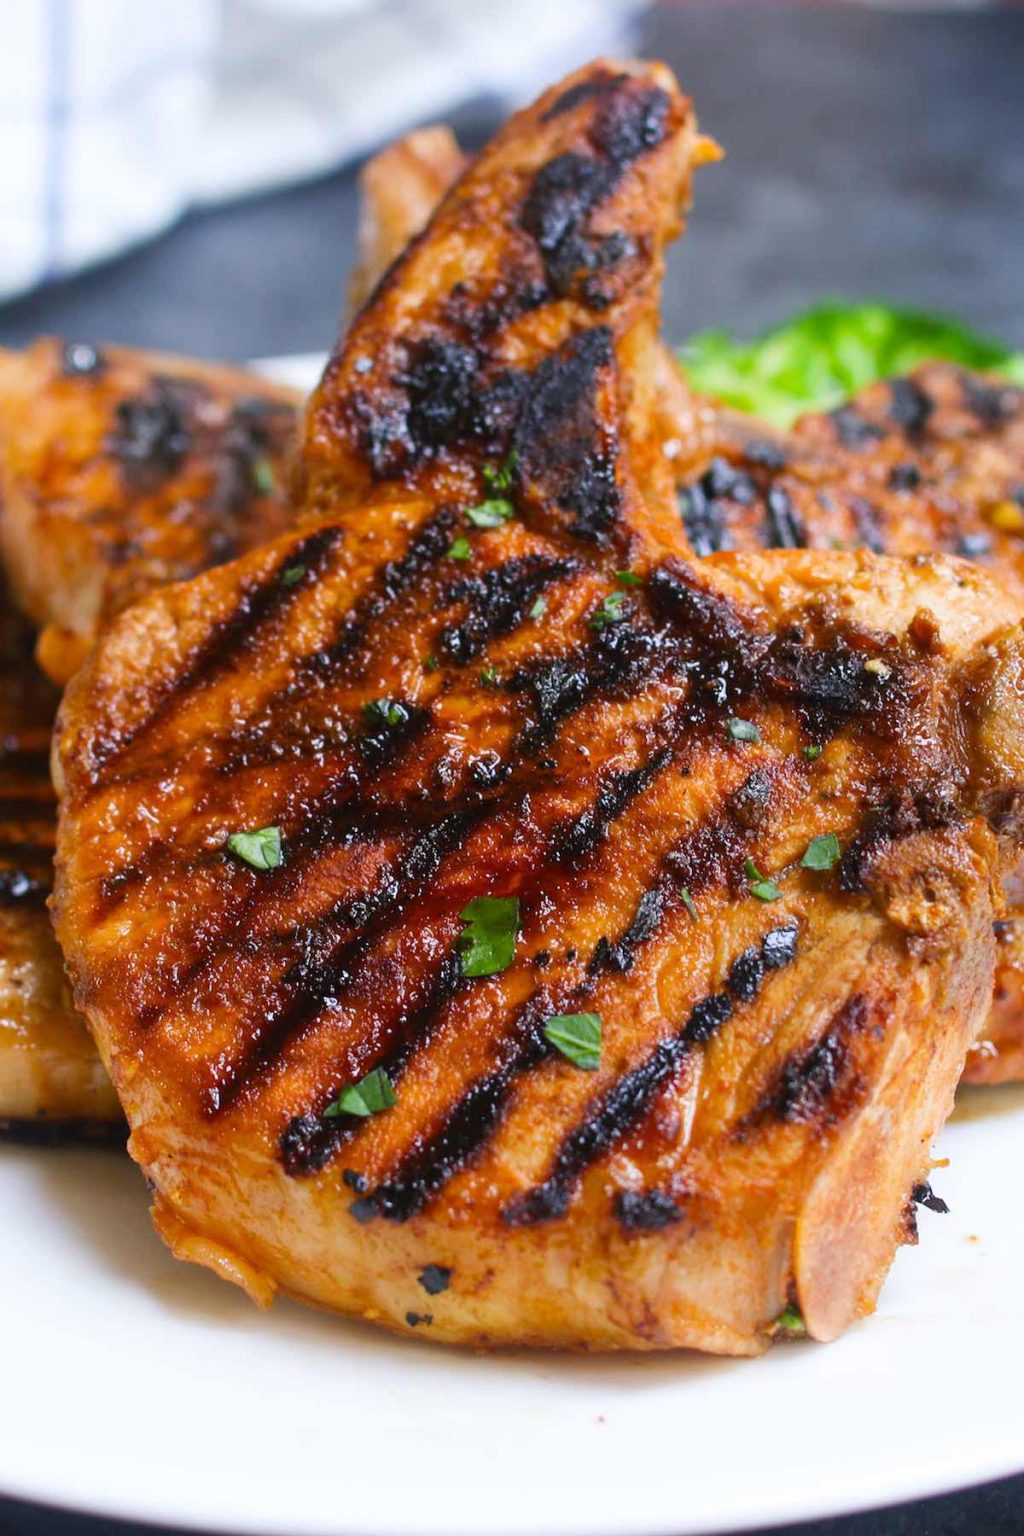 internal temperature for cooked pork chops